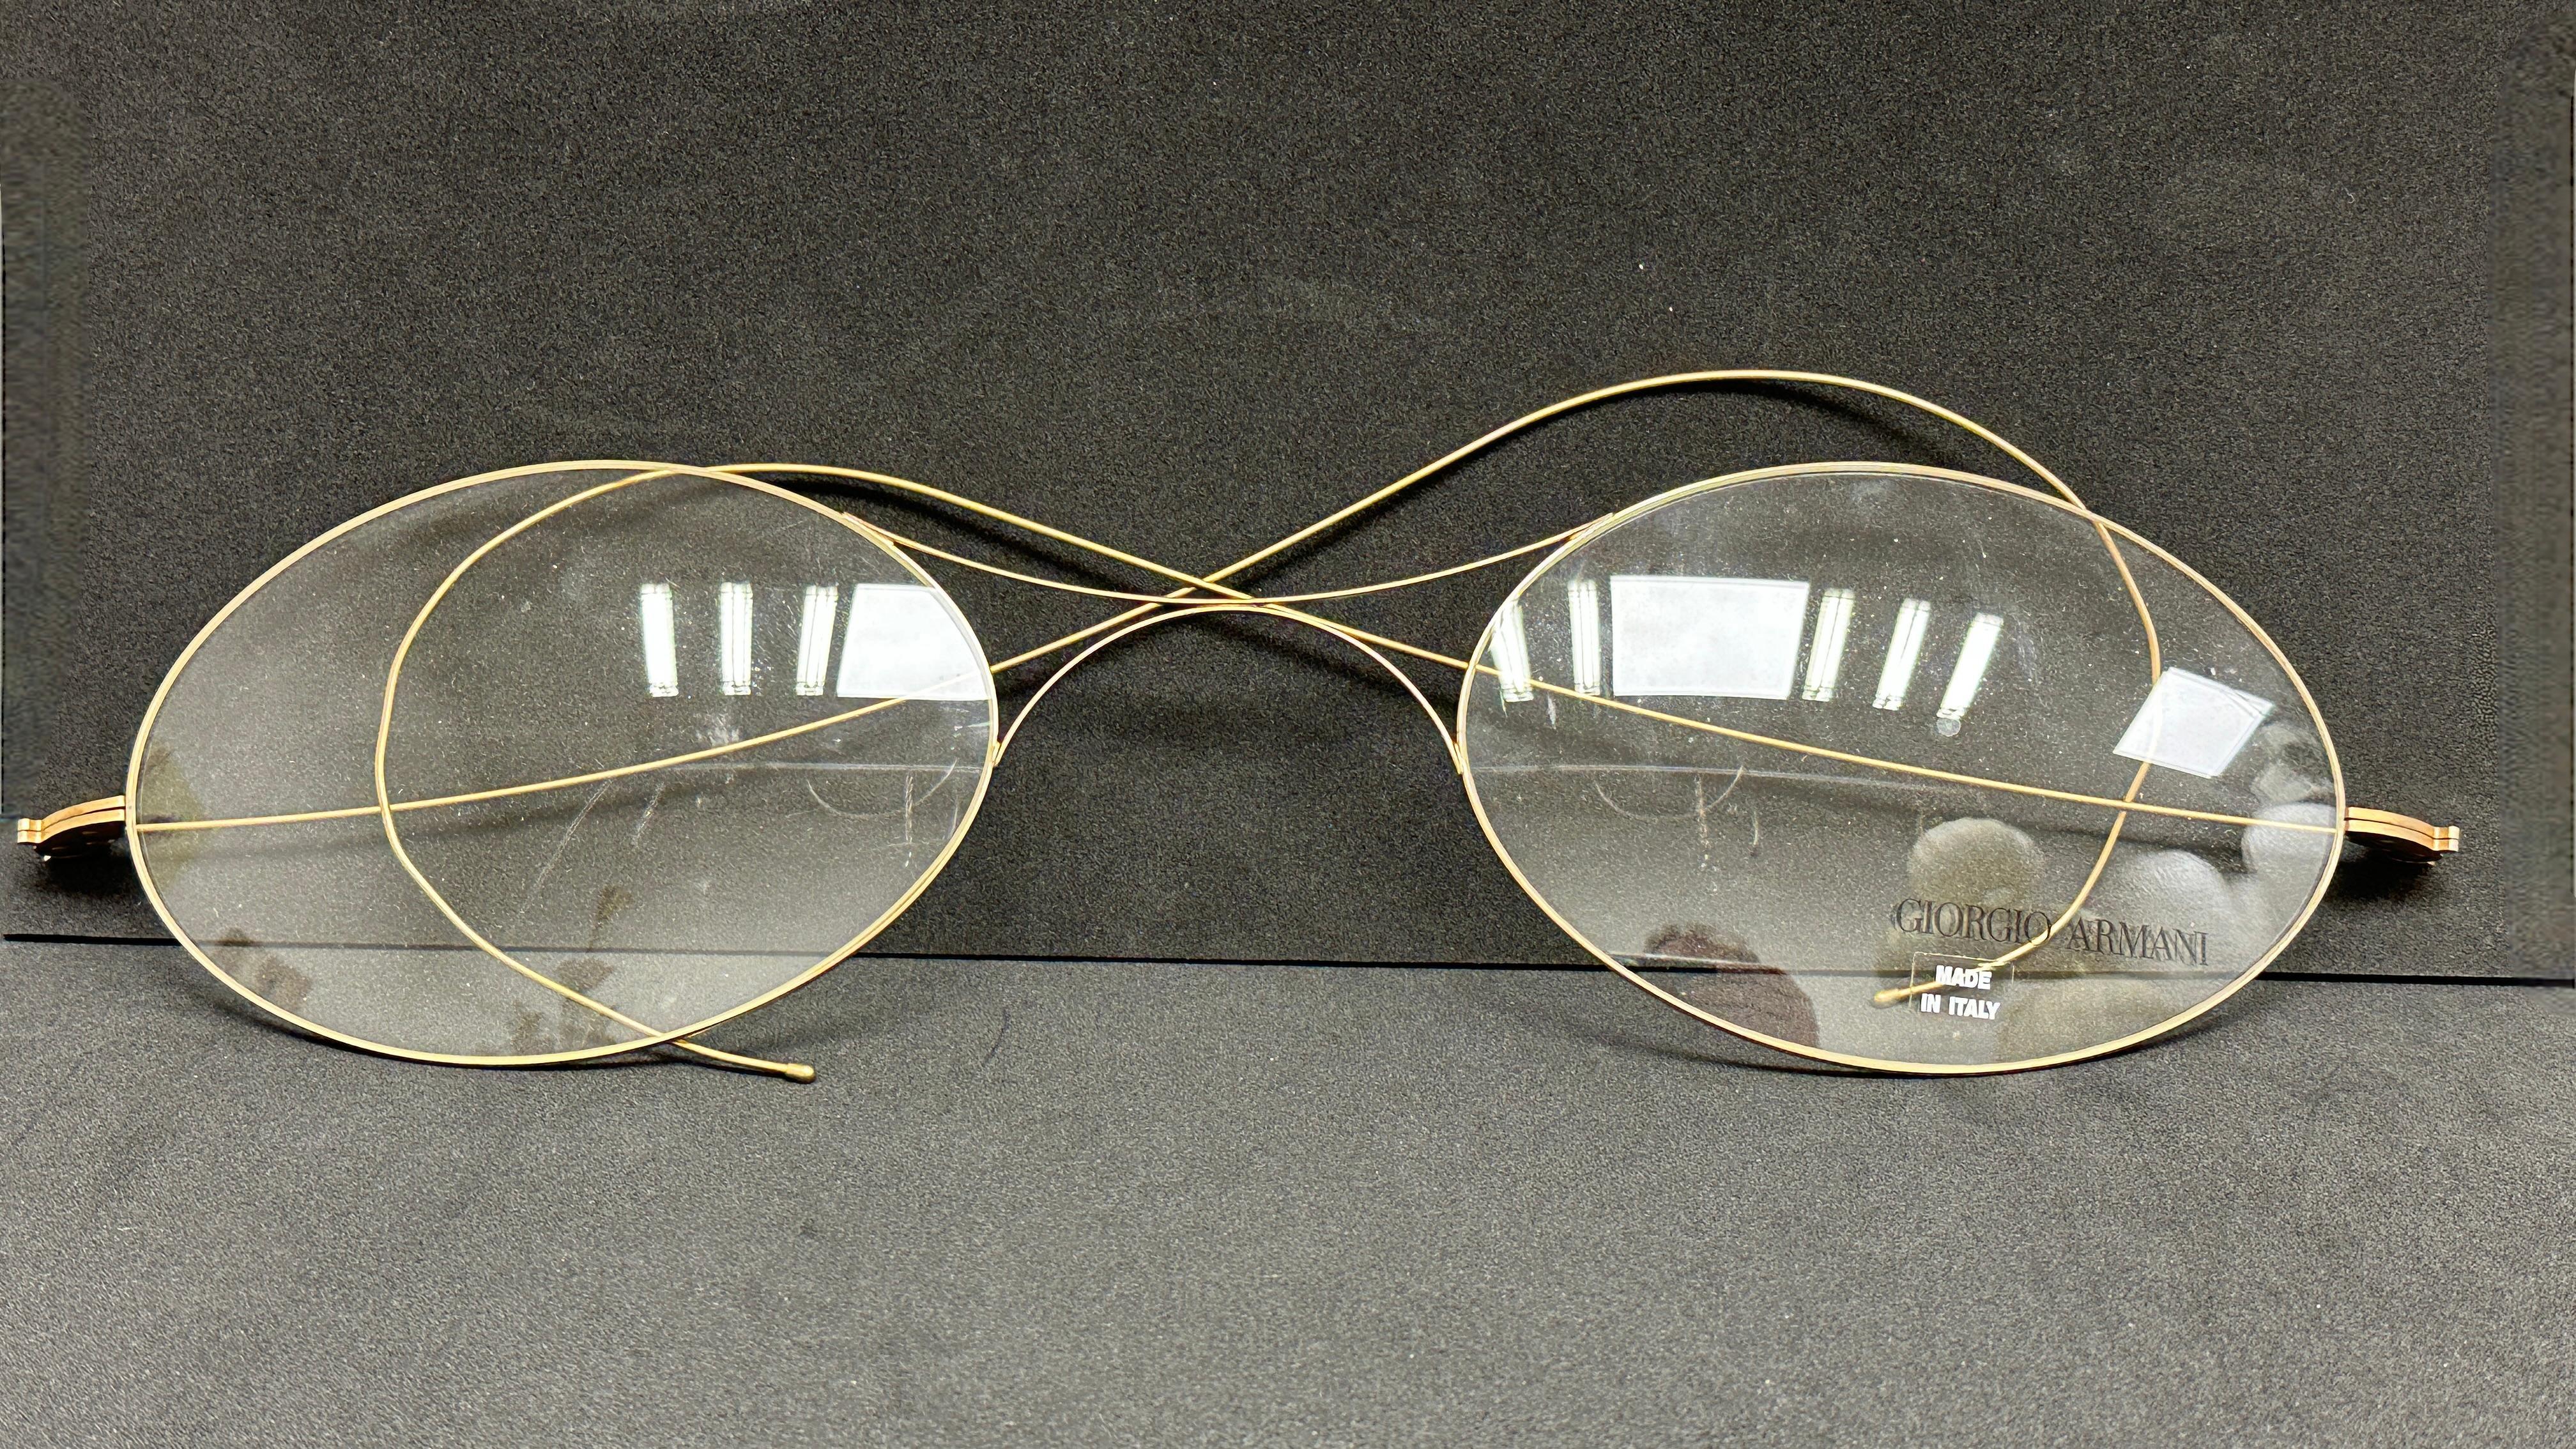 Large Mid-Century Italian Giorgio Armani Eye Glasses Factice Shop Display Piece In Good Condition For Sale In Nuernberg, DE